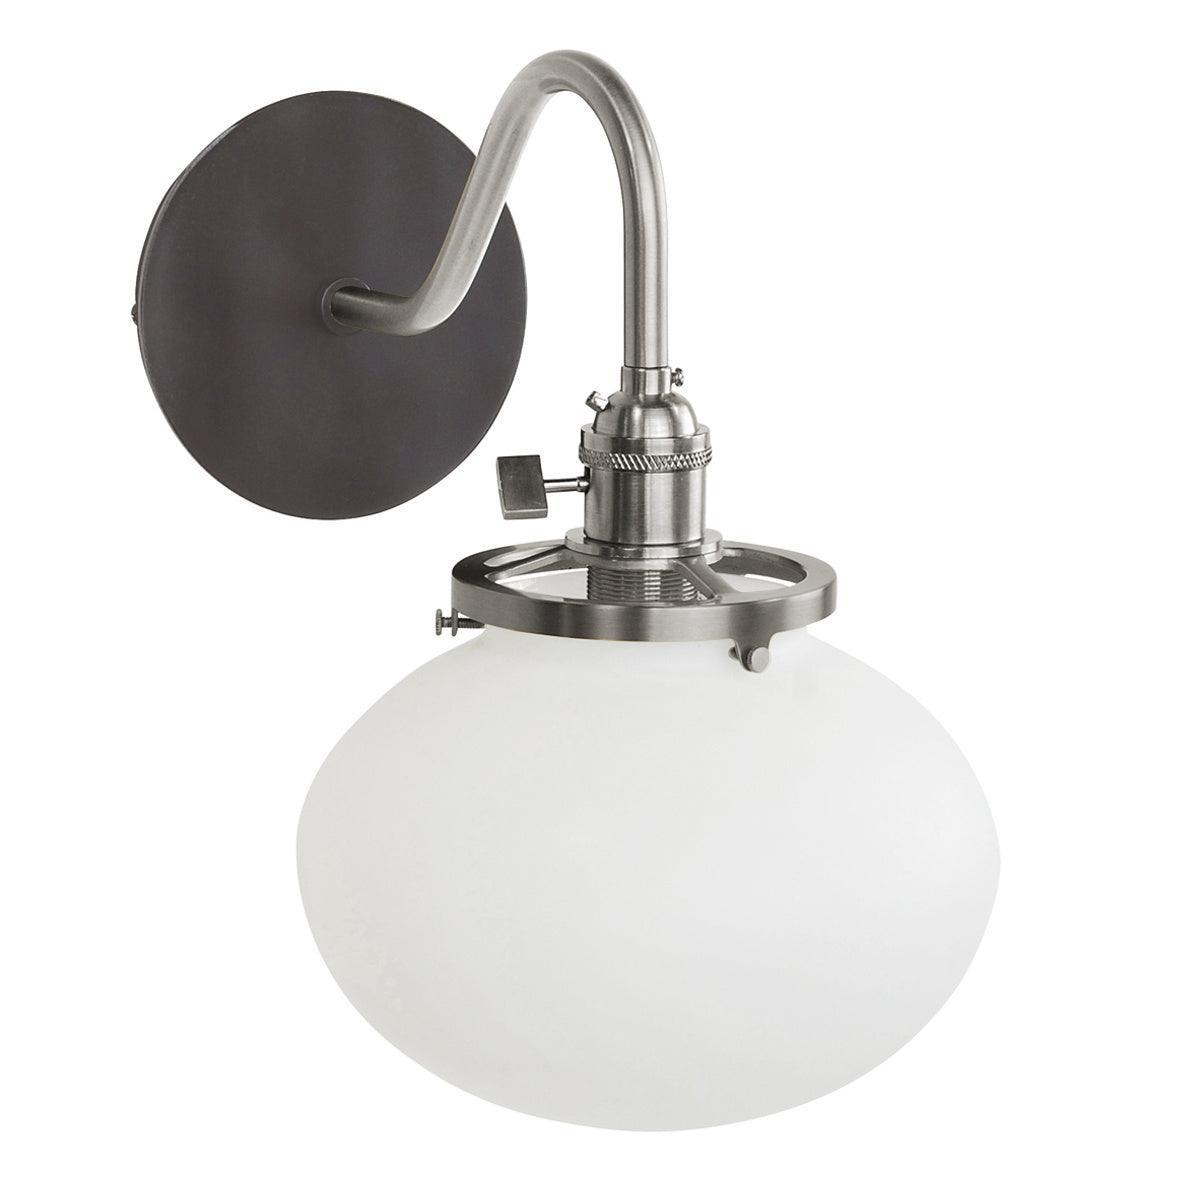 Montclair Light Works - Uno SCL411 Wall Sconce - SCL411-51-96 | Montreal Lighting & Hardware